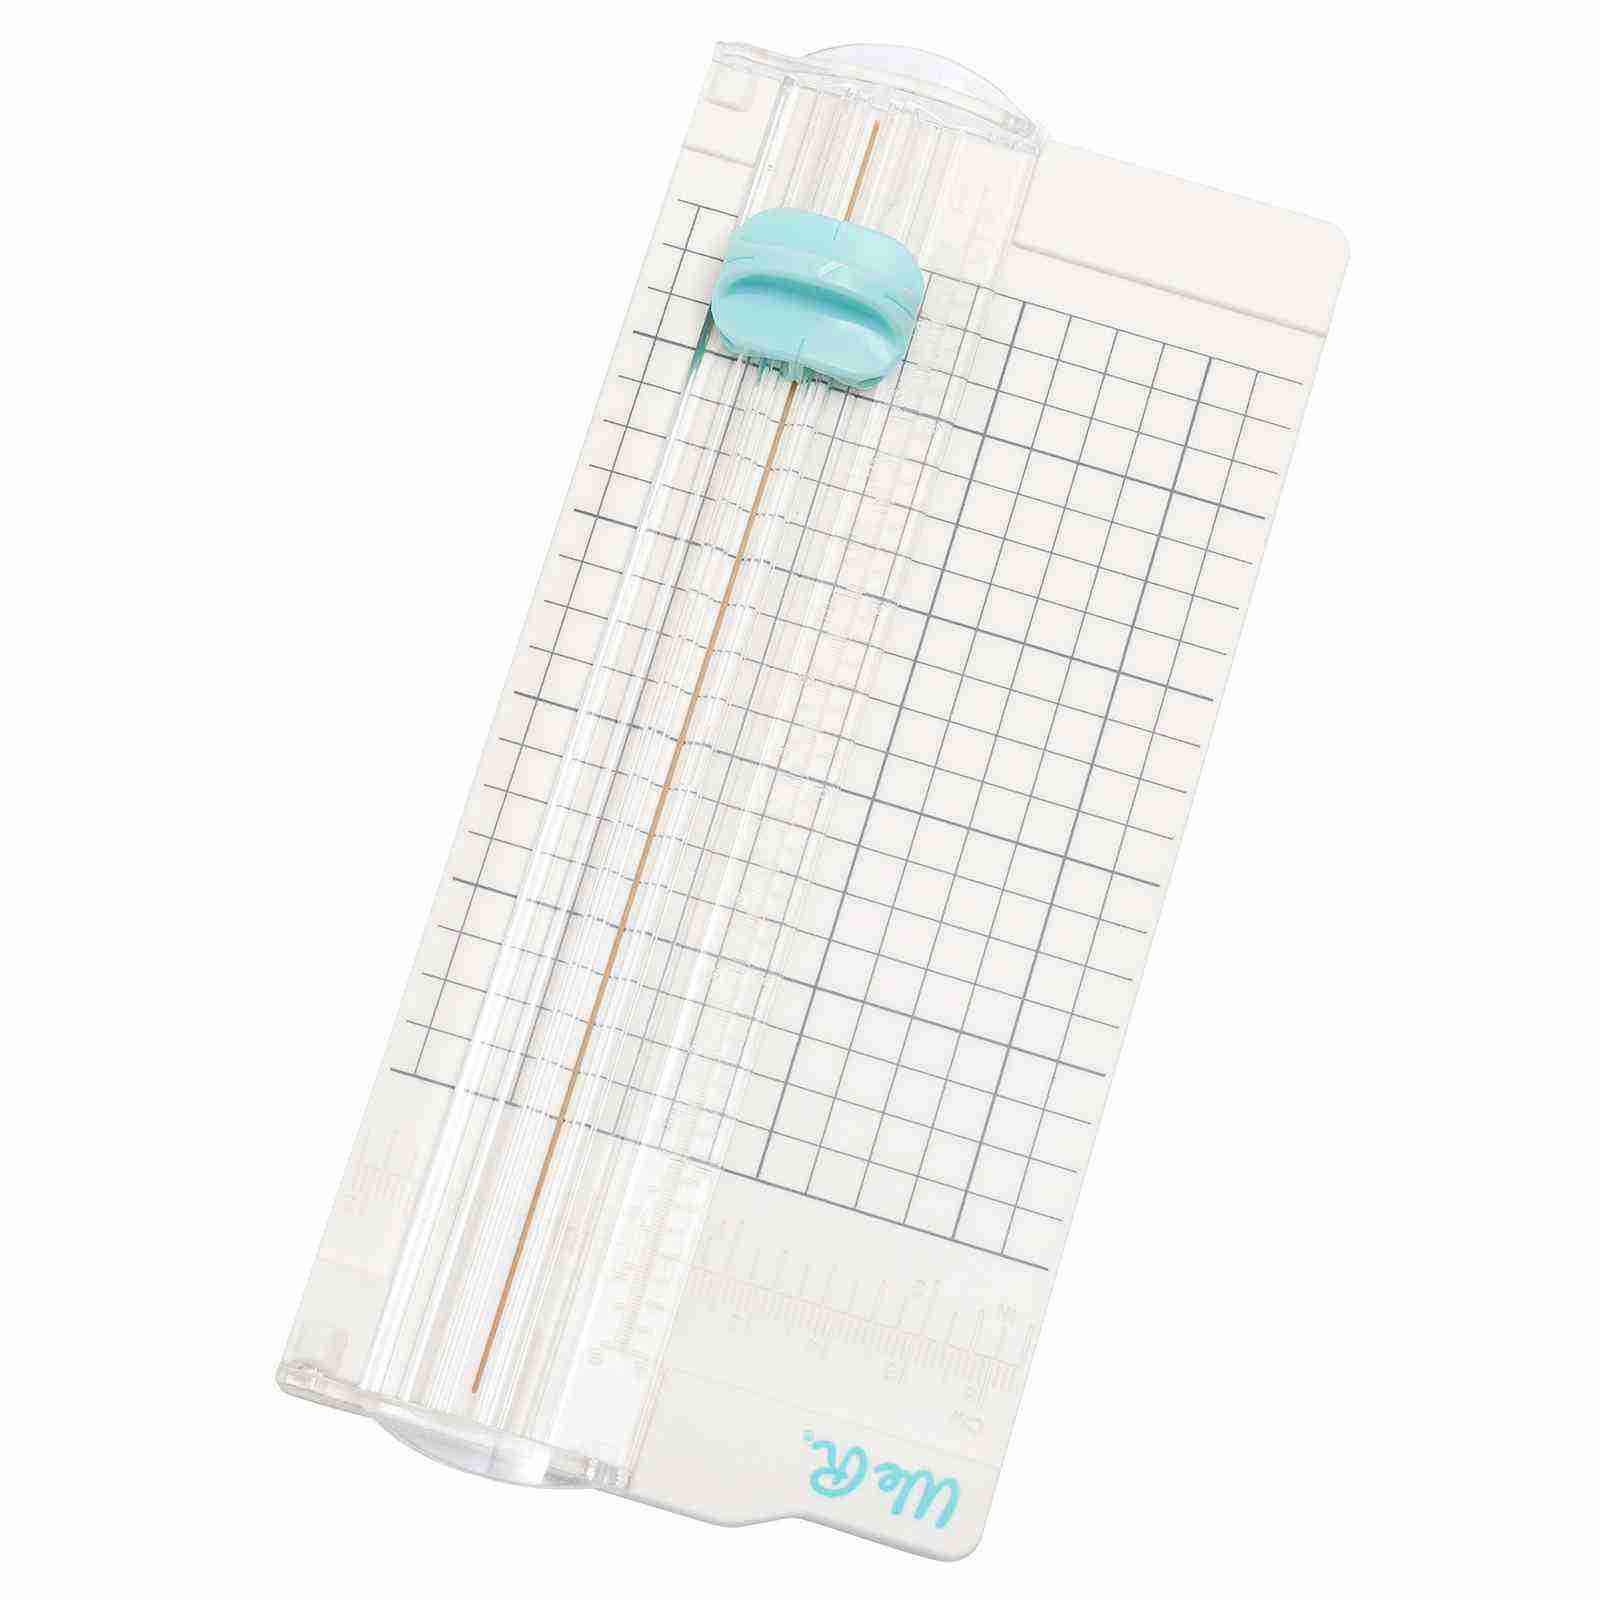 We R Memory Keepers Journal Mini Trimmer